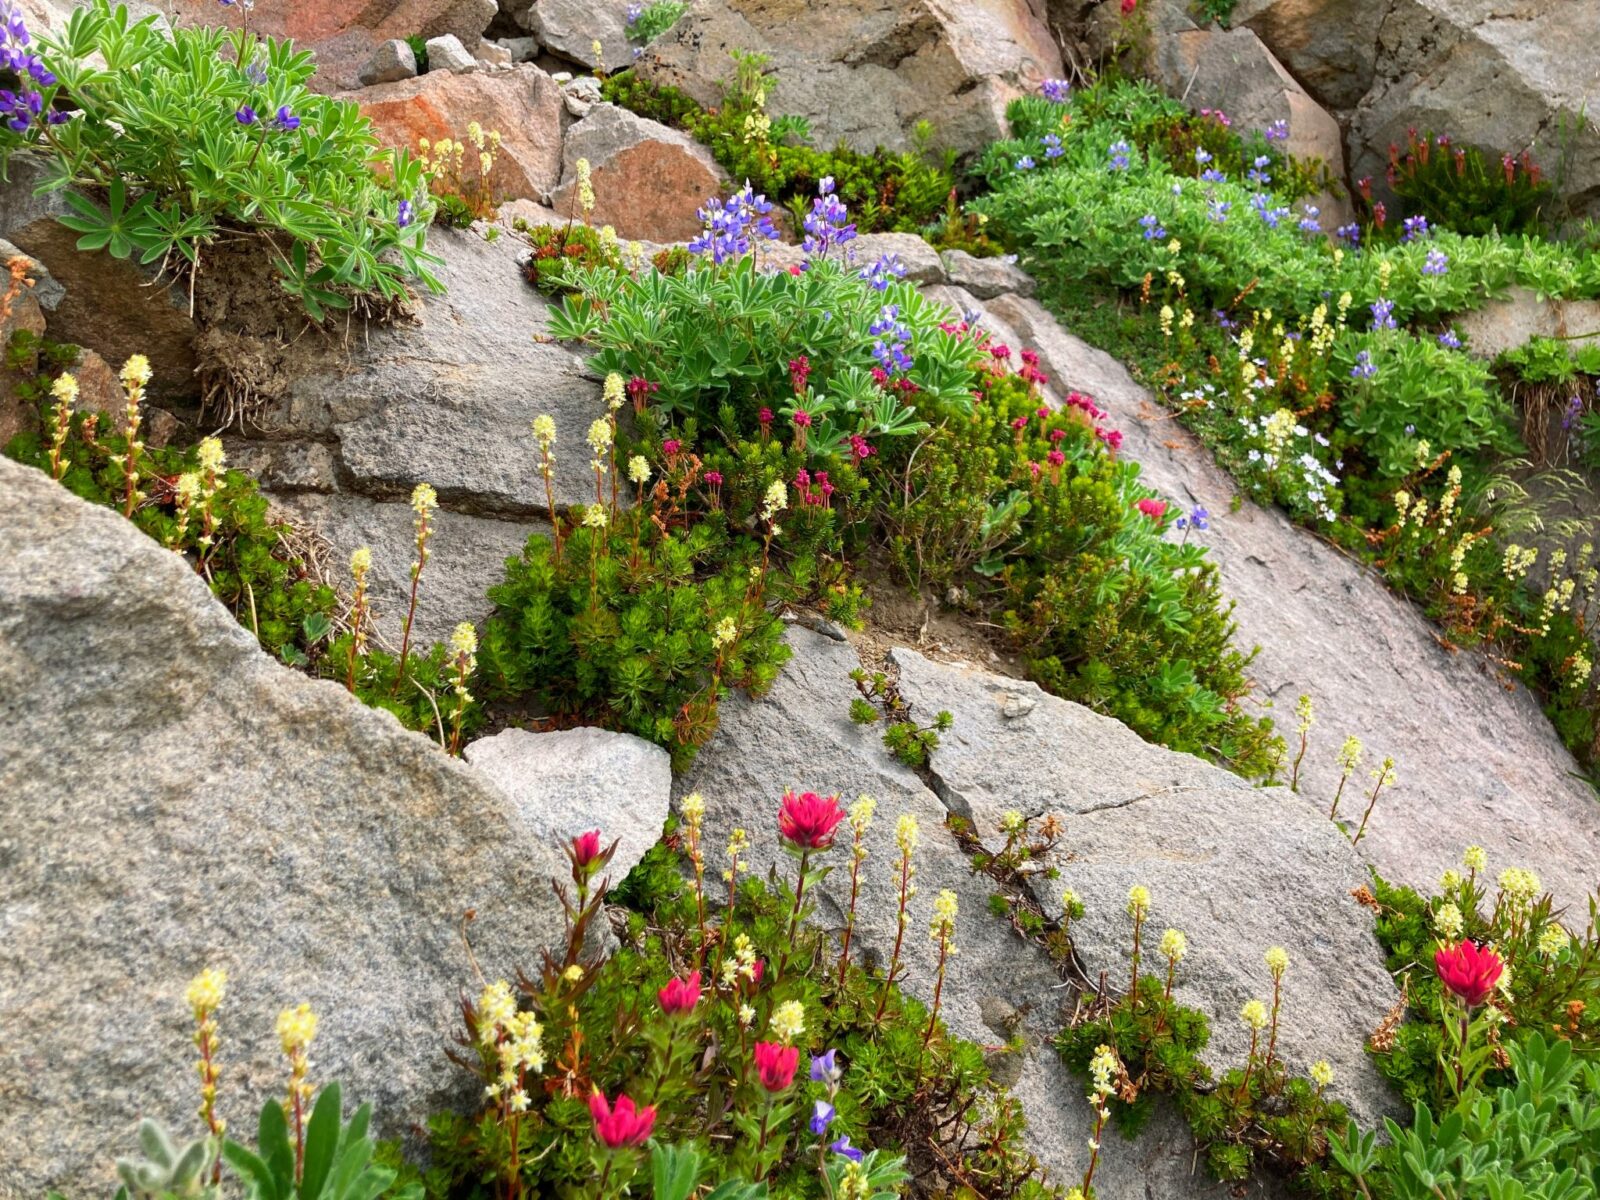 Wildflowers grow around rocks along the Skyline Trail in Mt Rainier National Park. There are magenta, white and purple flowers with green bushes around them